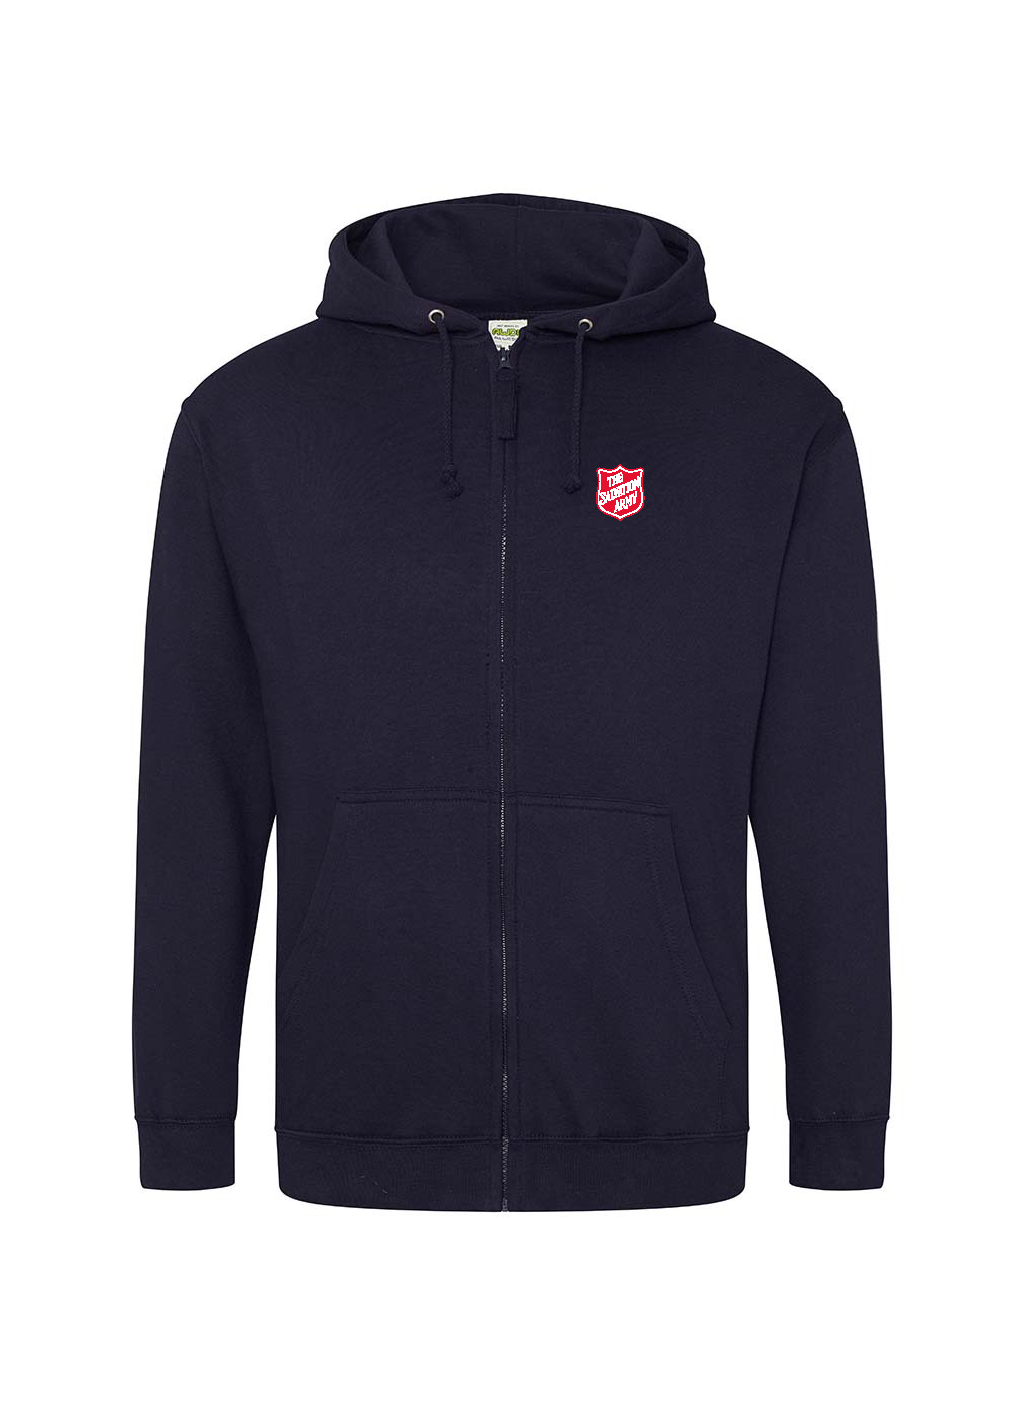 Men's Zipped Hoodie - Navy with Red Shield